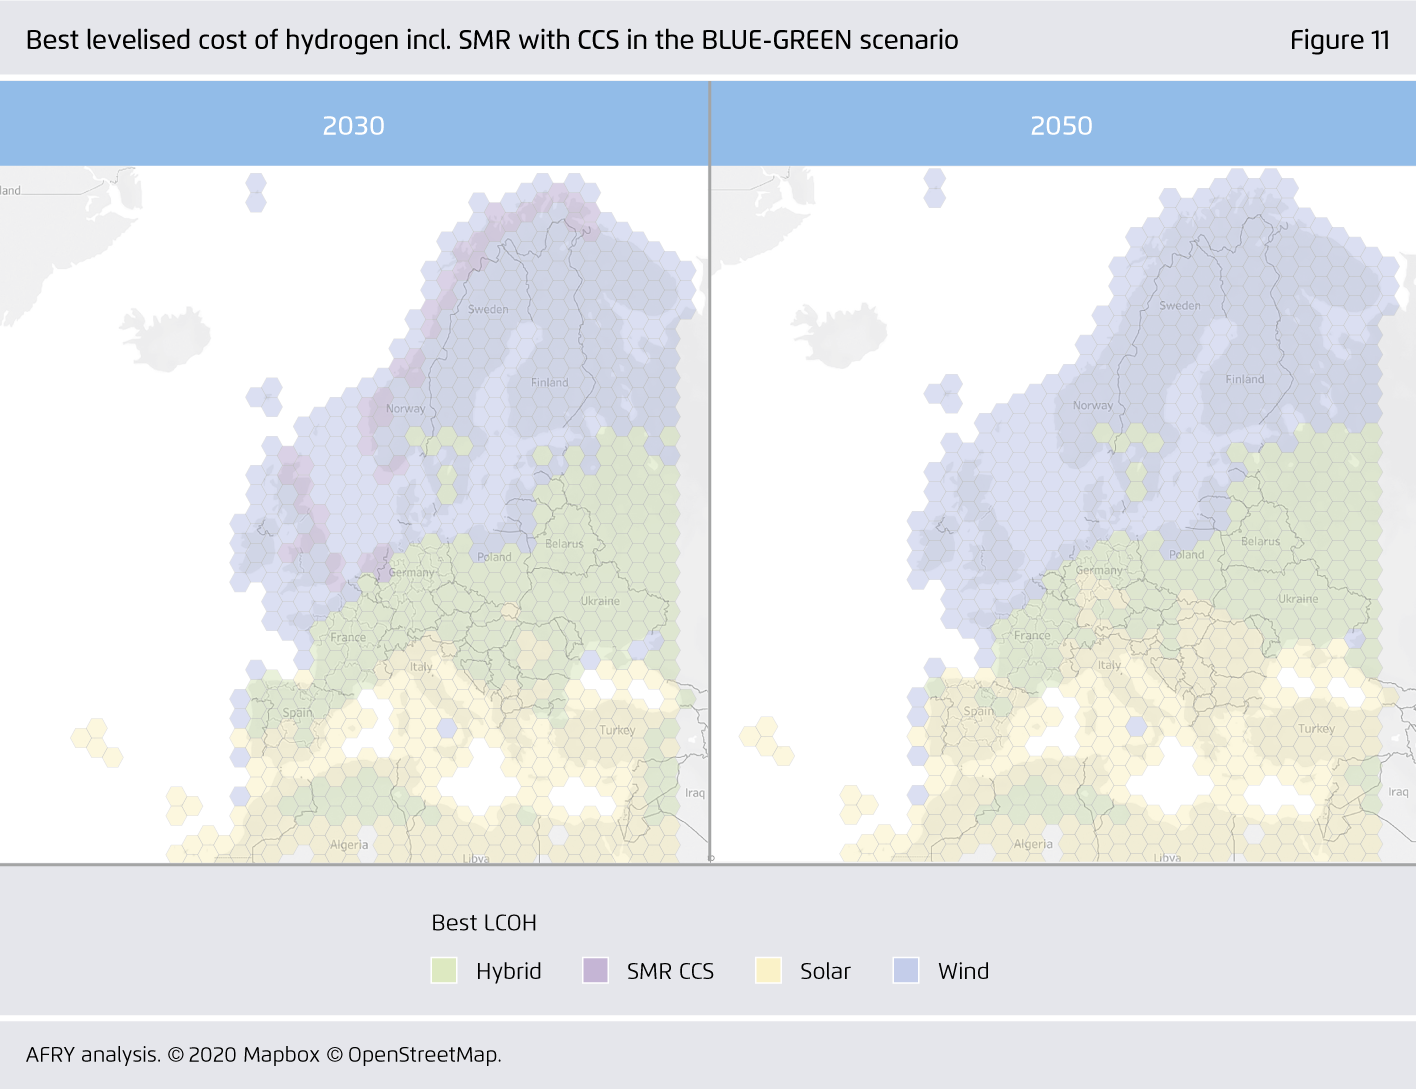 Preview for Best levelised cost of hydrogen incl. SMR with CCS in the BLUE-GREEN scenario